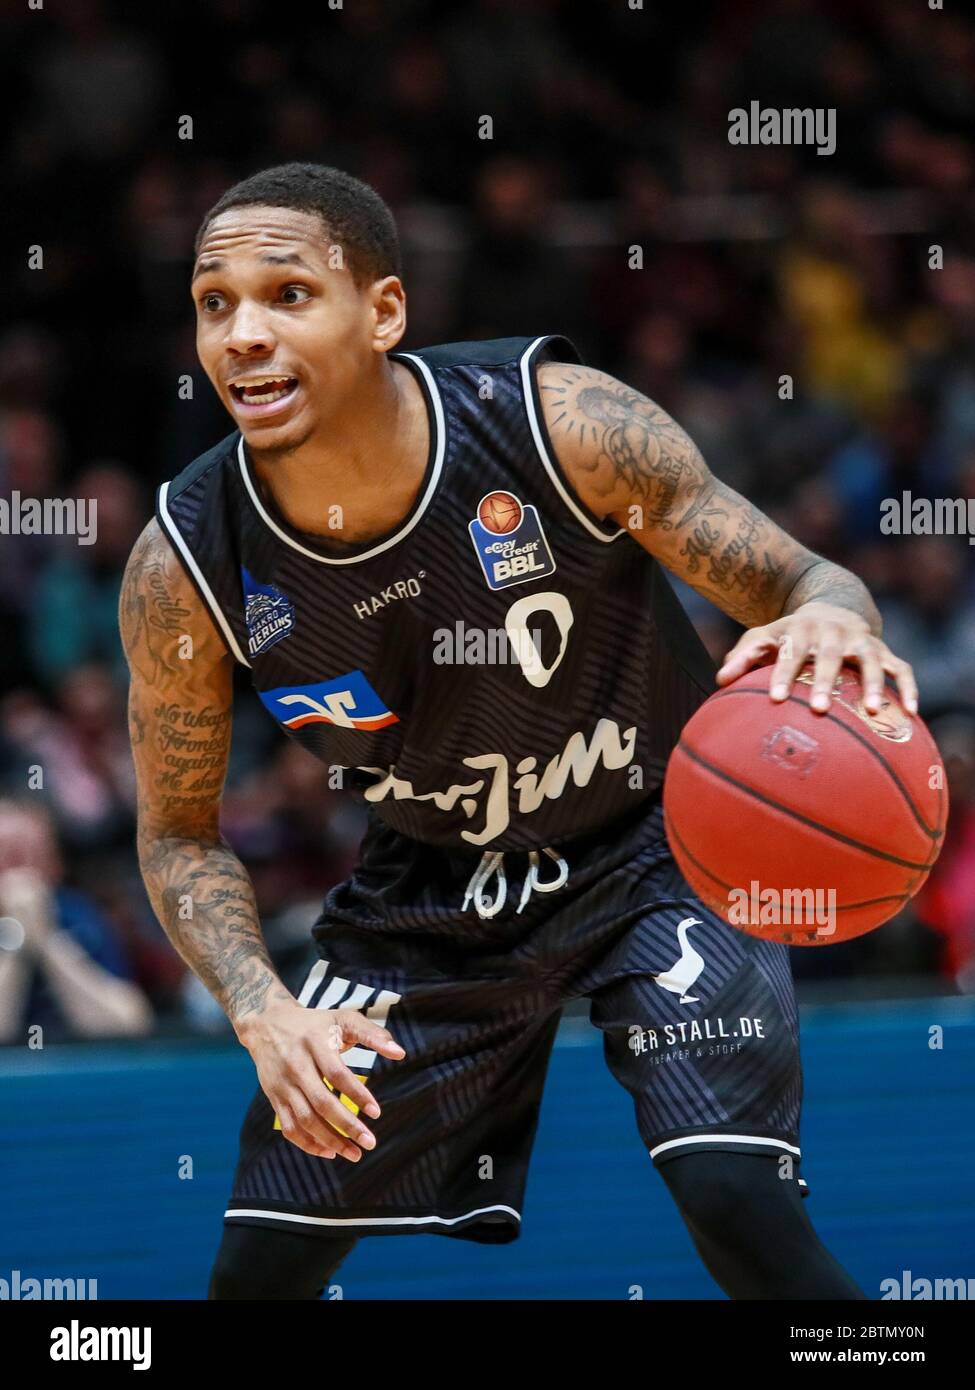 Braunschweig, Germany, December 27, 2019:basketball player DeWayne Russell in action during the Basketball BBL Bundesliga match Stock Photo